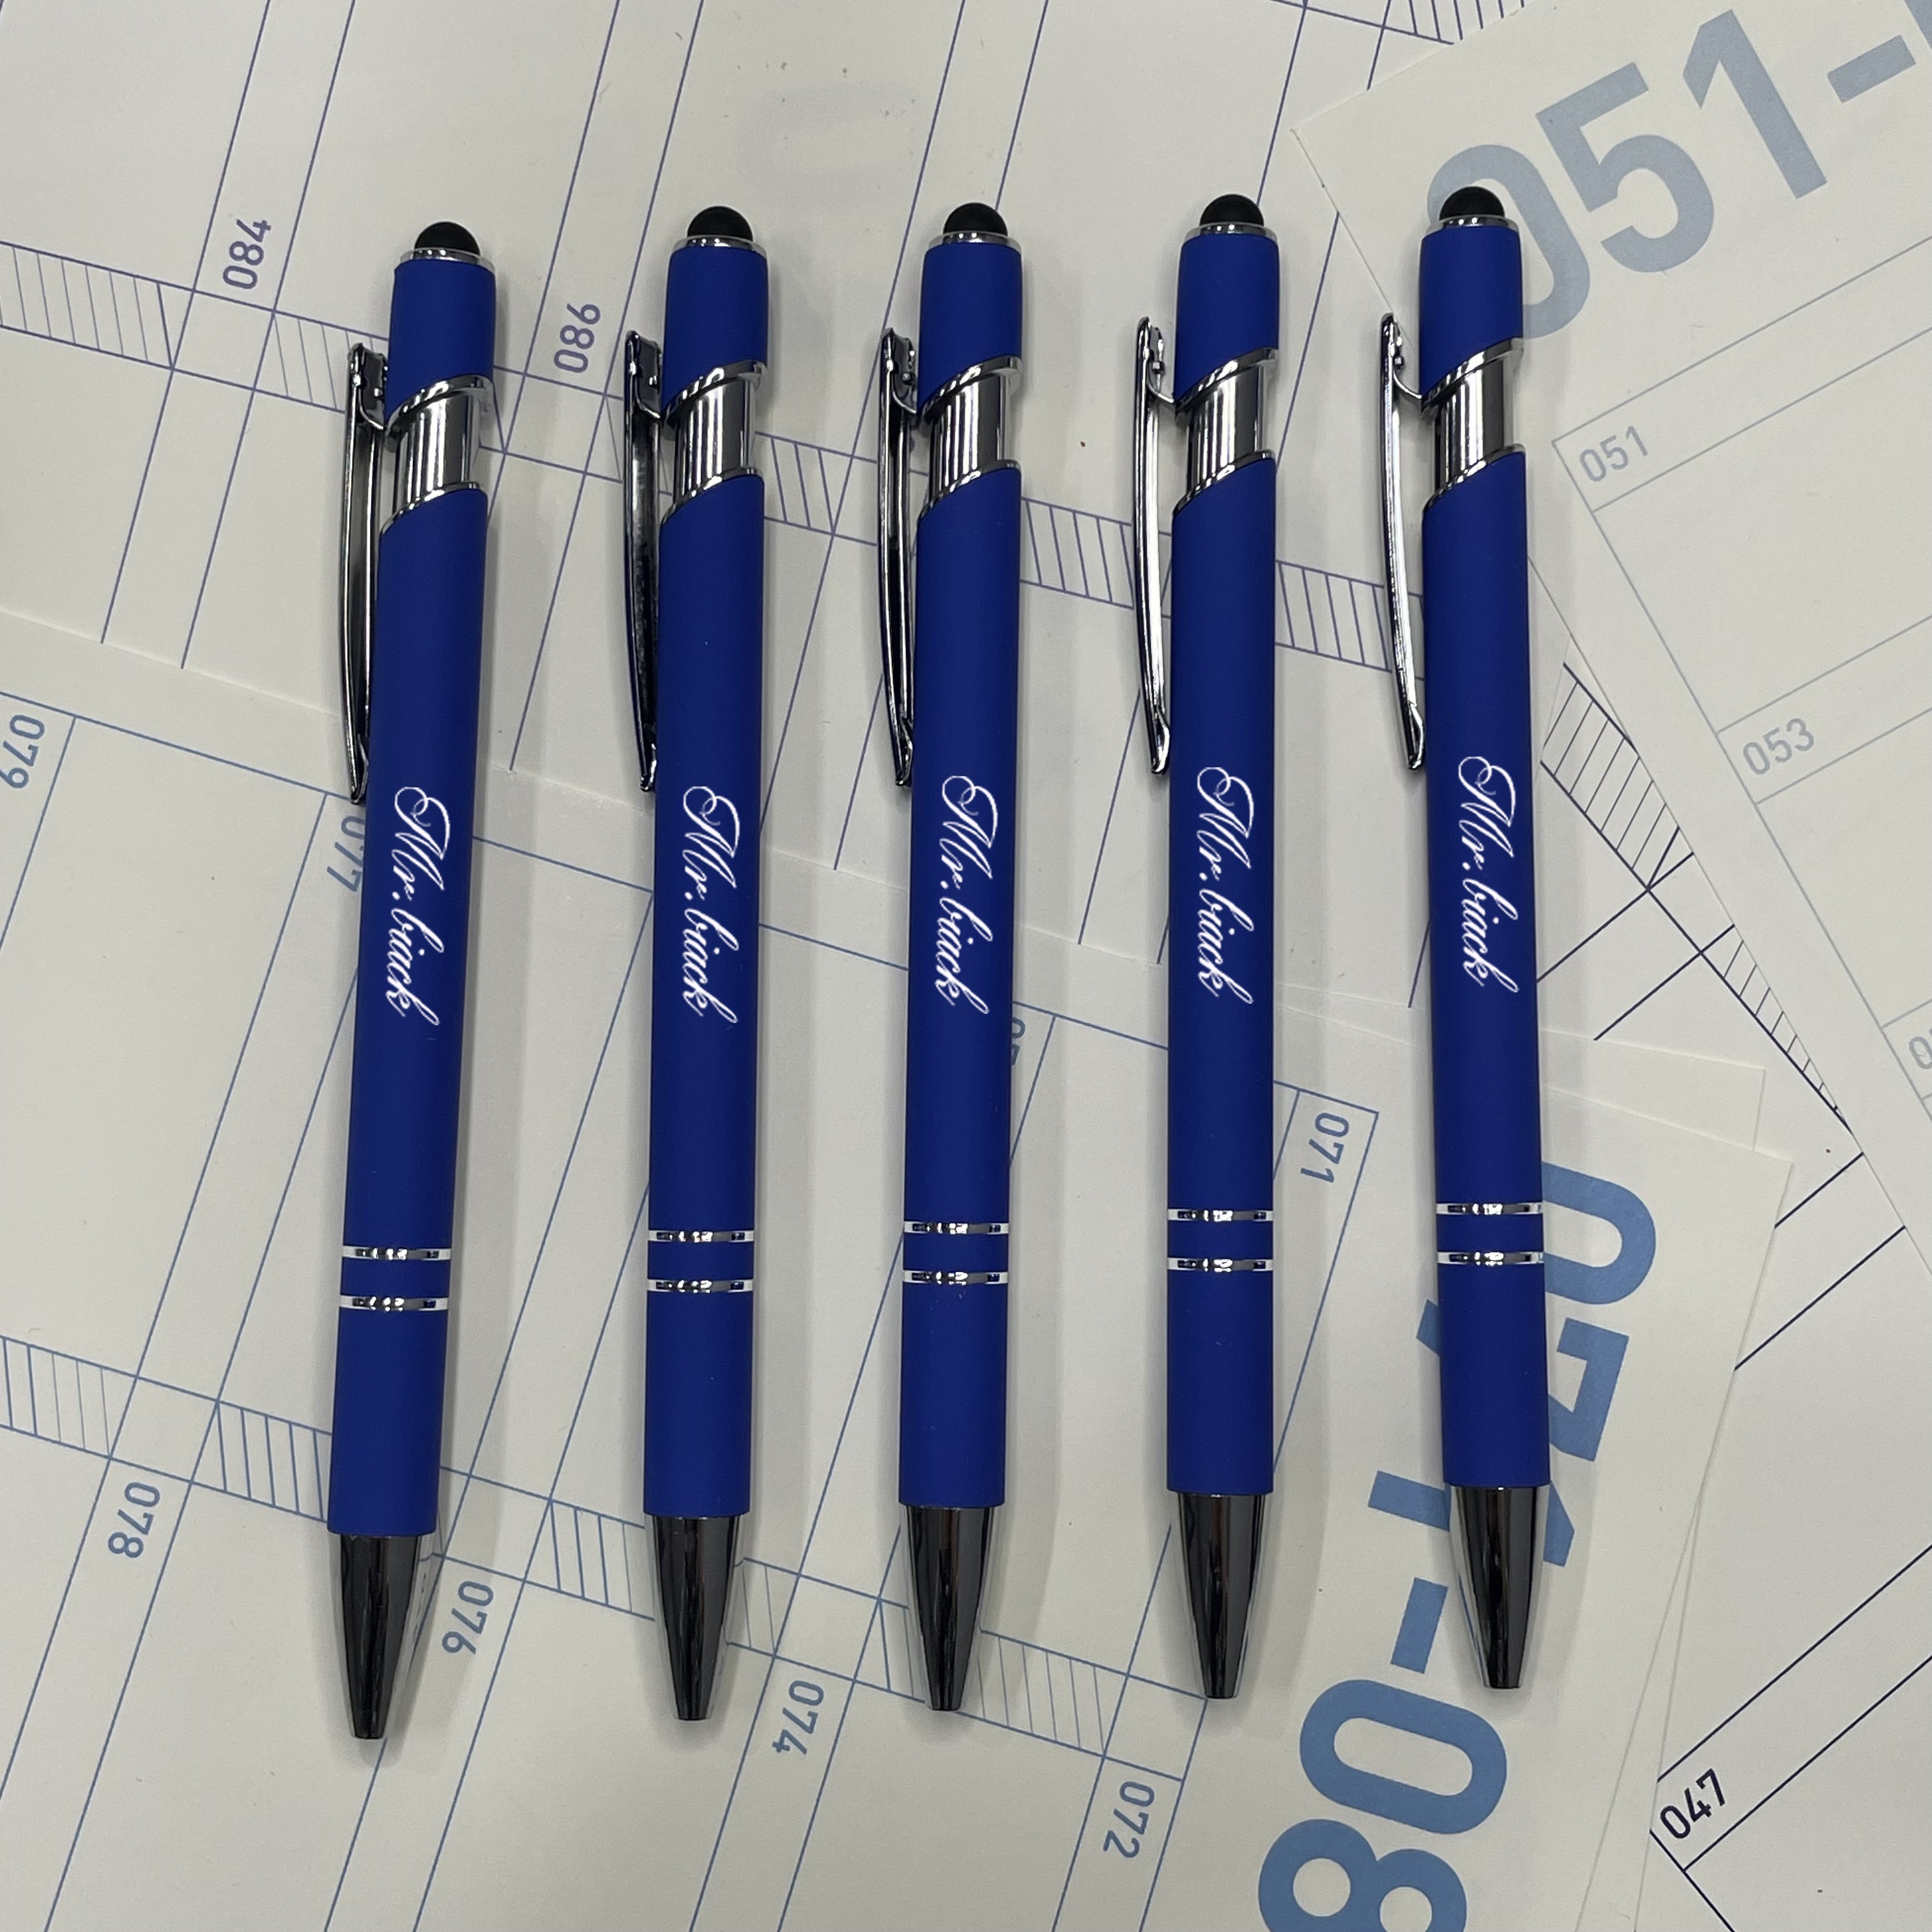 

5pcs, Blue Personalized Text Custom Metal Pen Touch Screen Pen, Male And Female Gift Pen, Company Name Custom Pen, Father's Day Mother's Day Gift, Father's Birthday Gift, Creative Party Gift (blue)